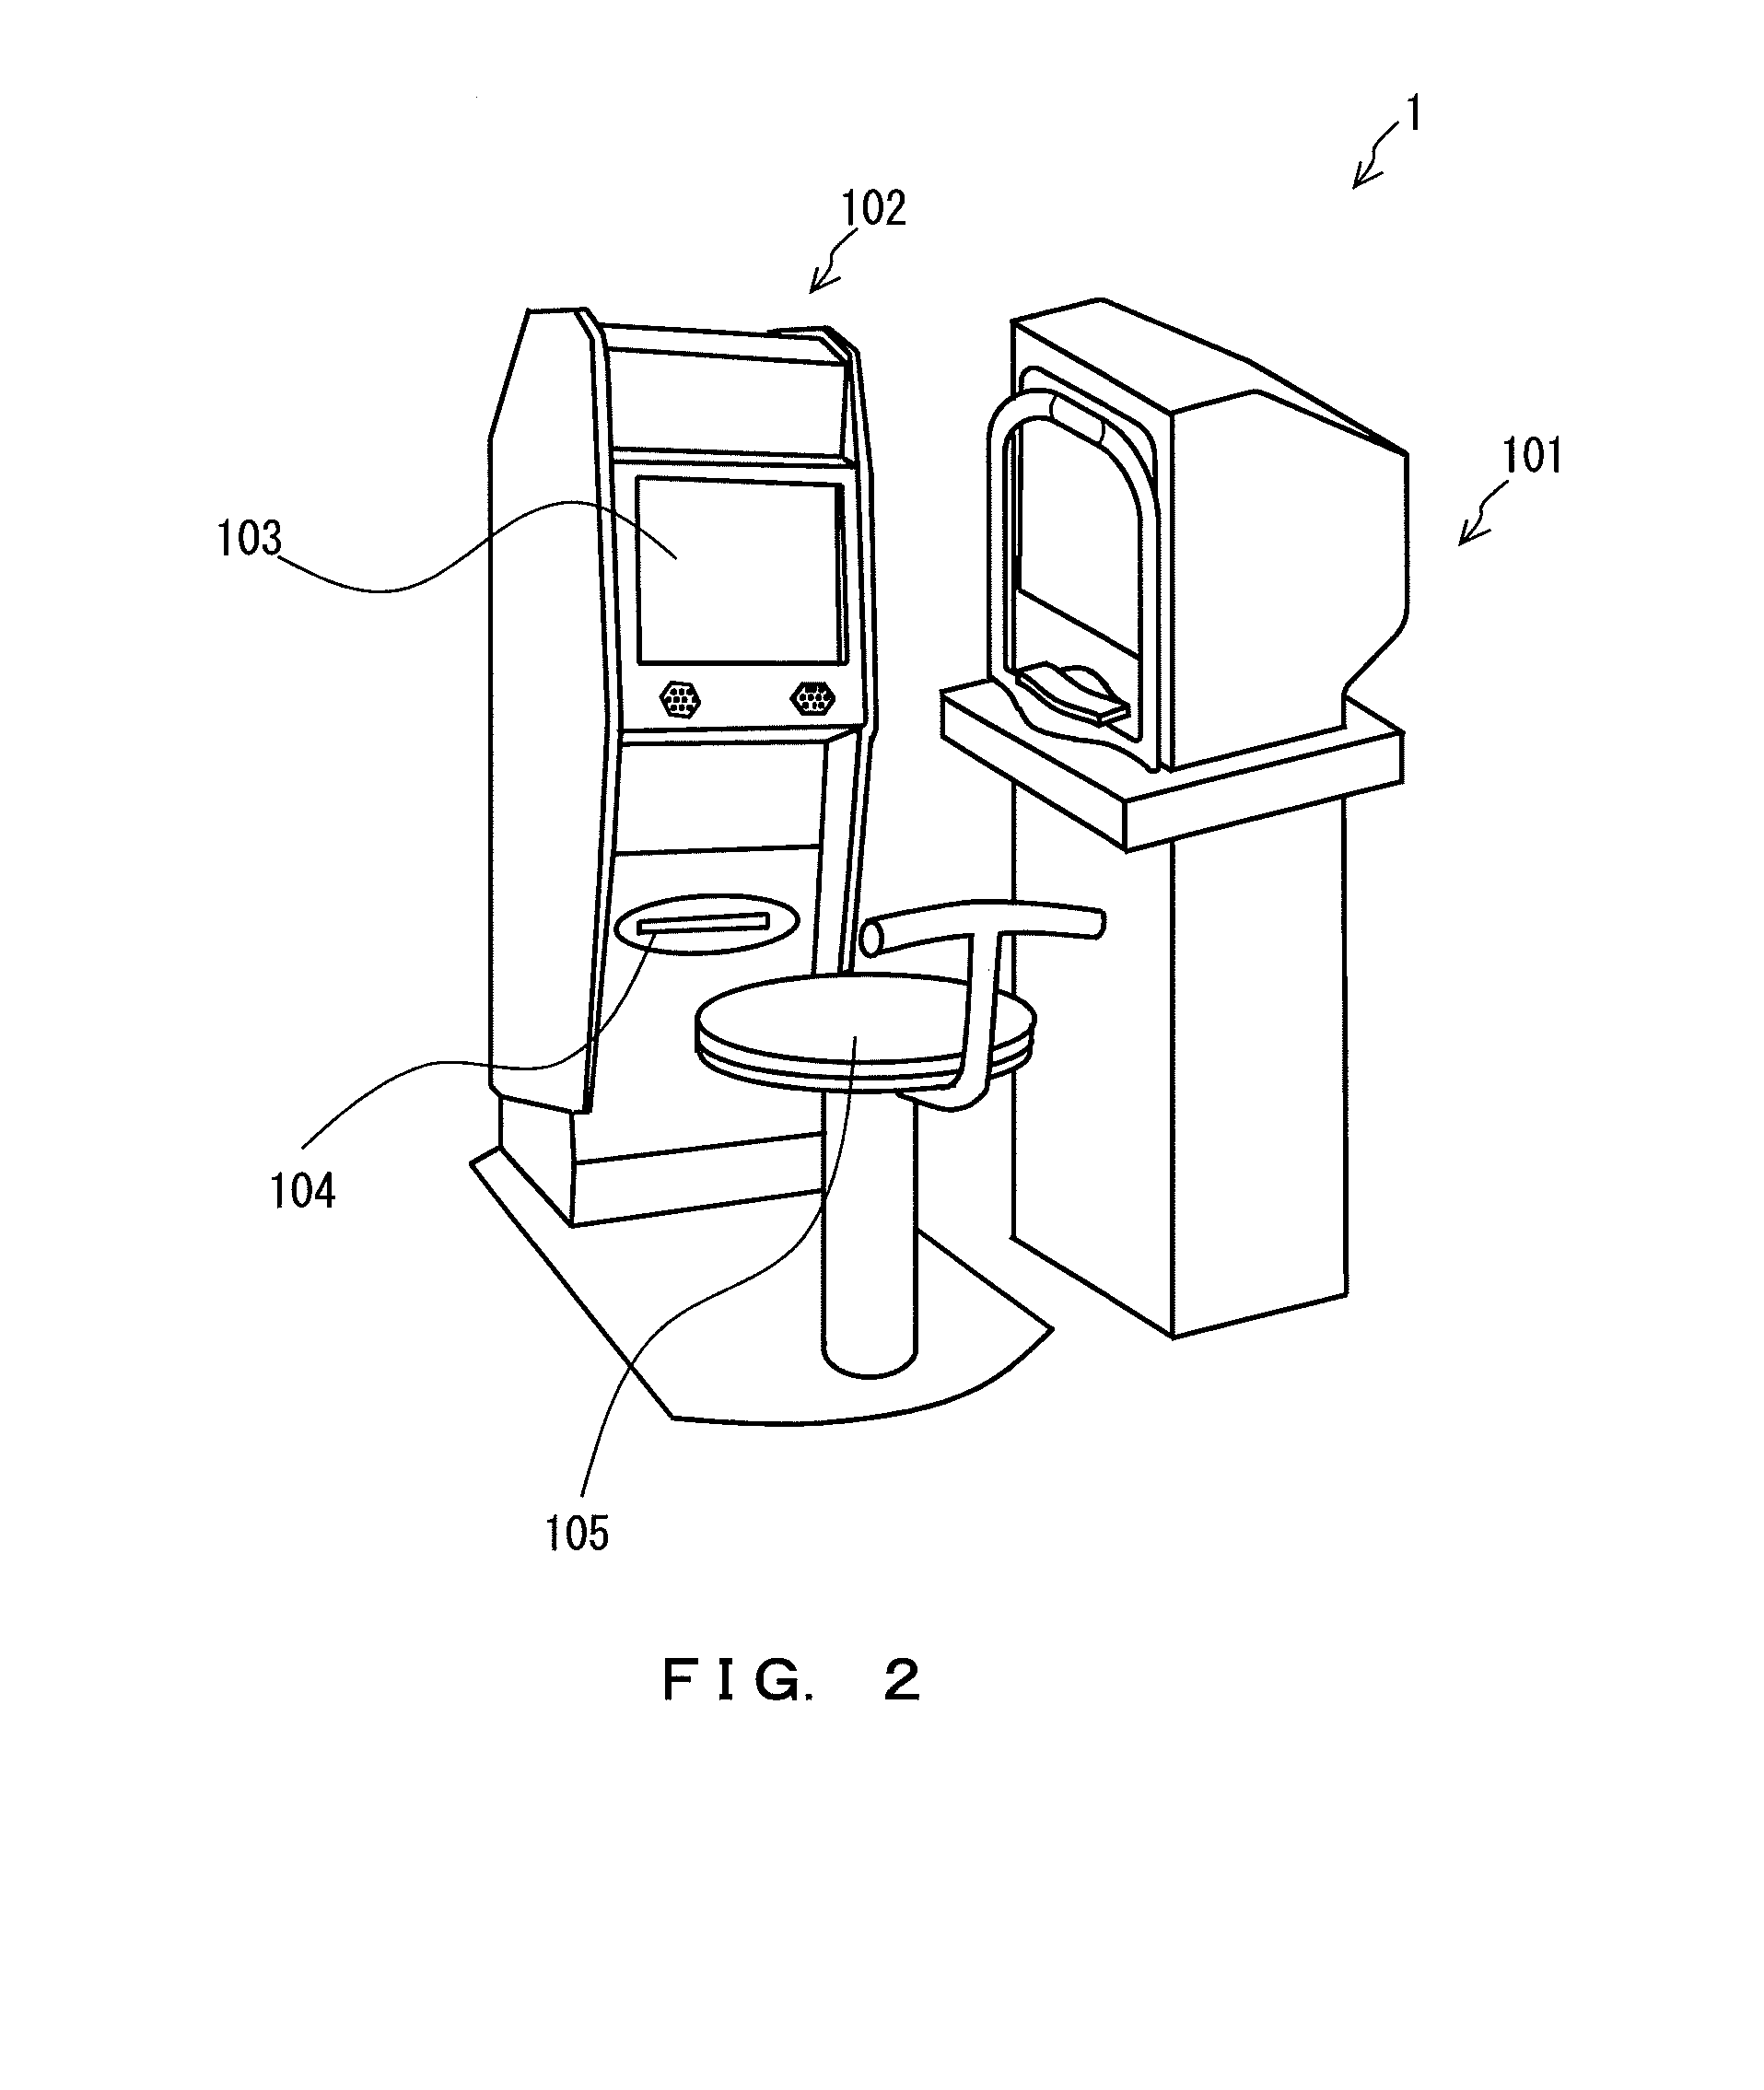 Apparatus for optometric self-examination, management server and contact lens selection system